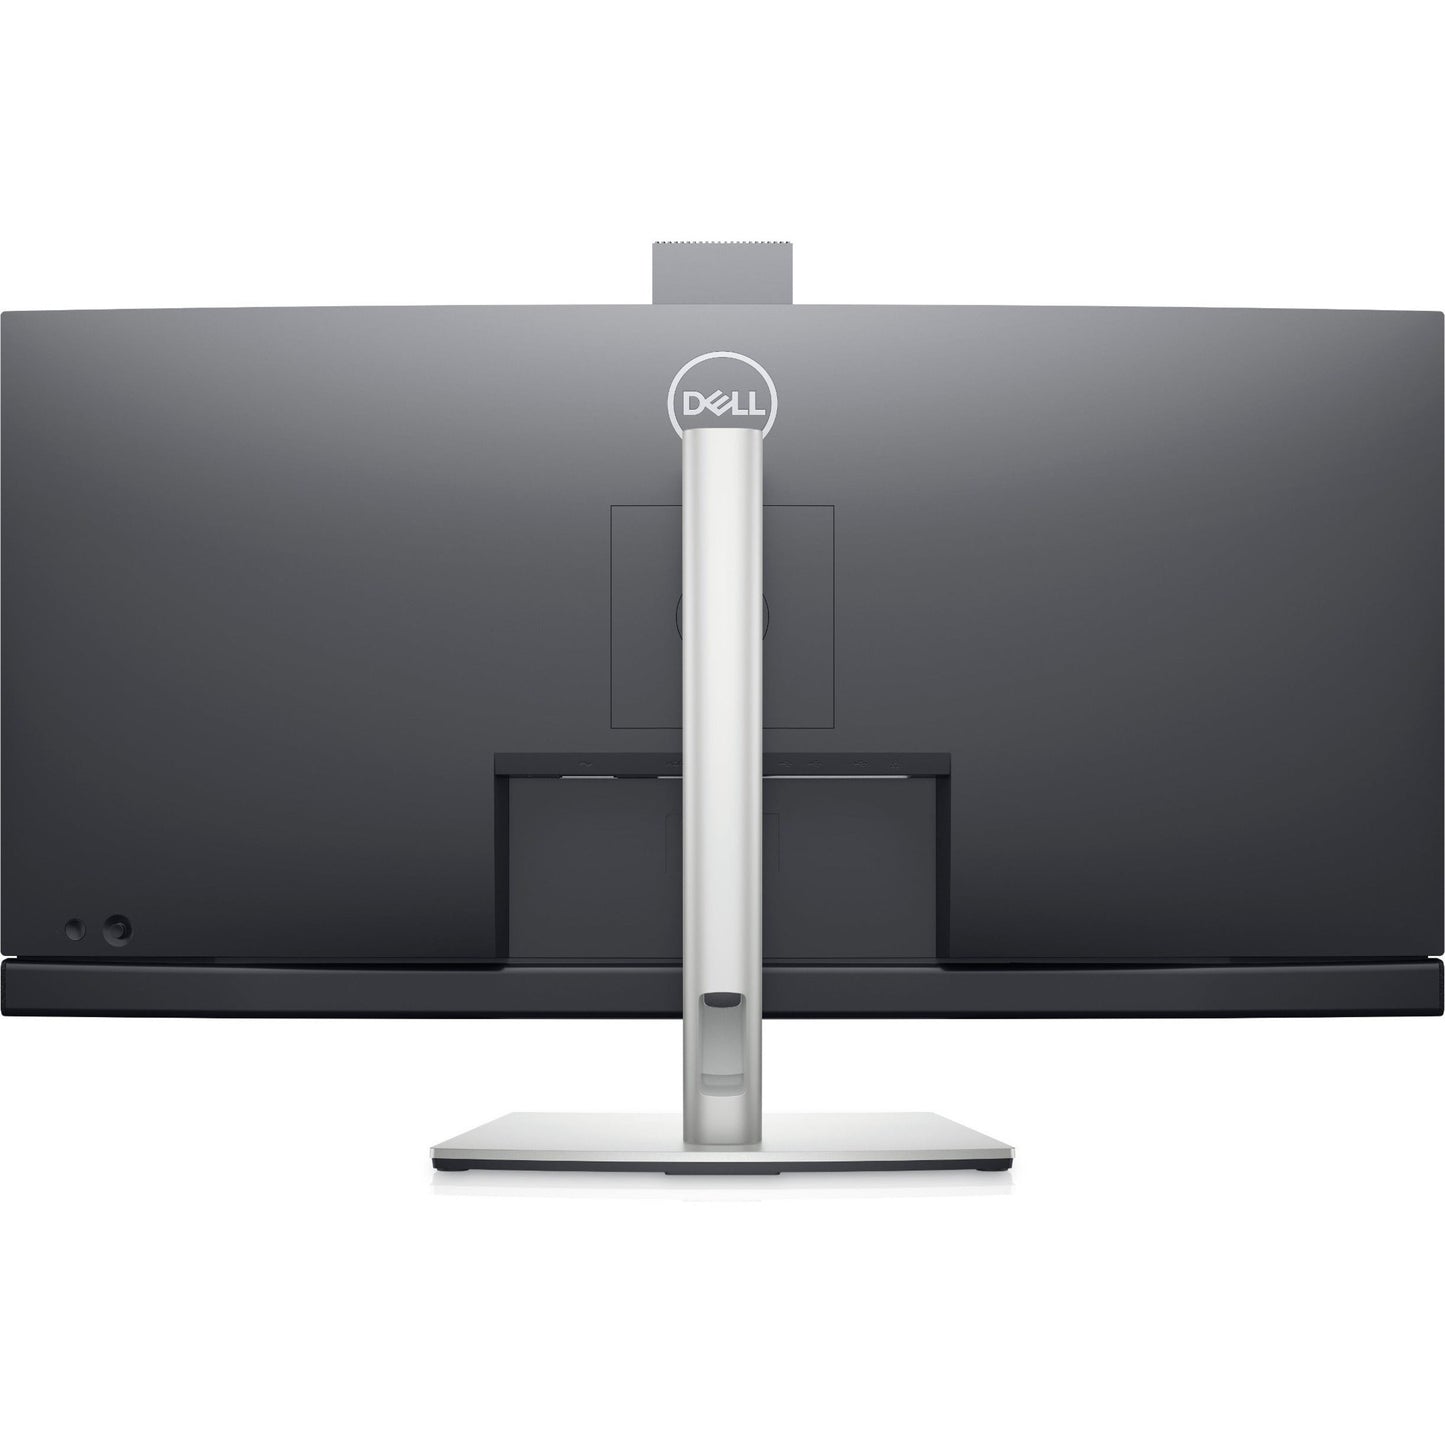 Dell C3422WE 34.1" Webcam WQHD Curved Screen LCD Monitor - 21:9 - Platinum Silver